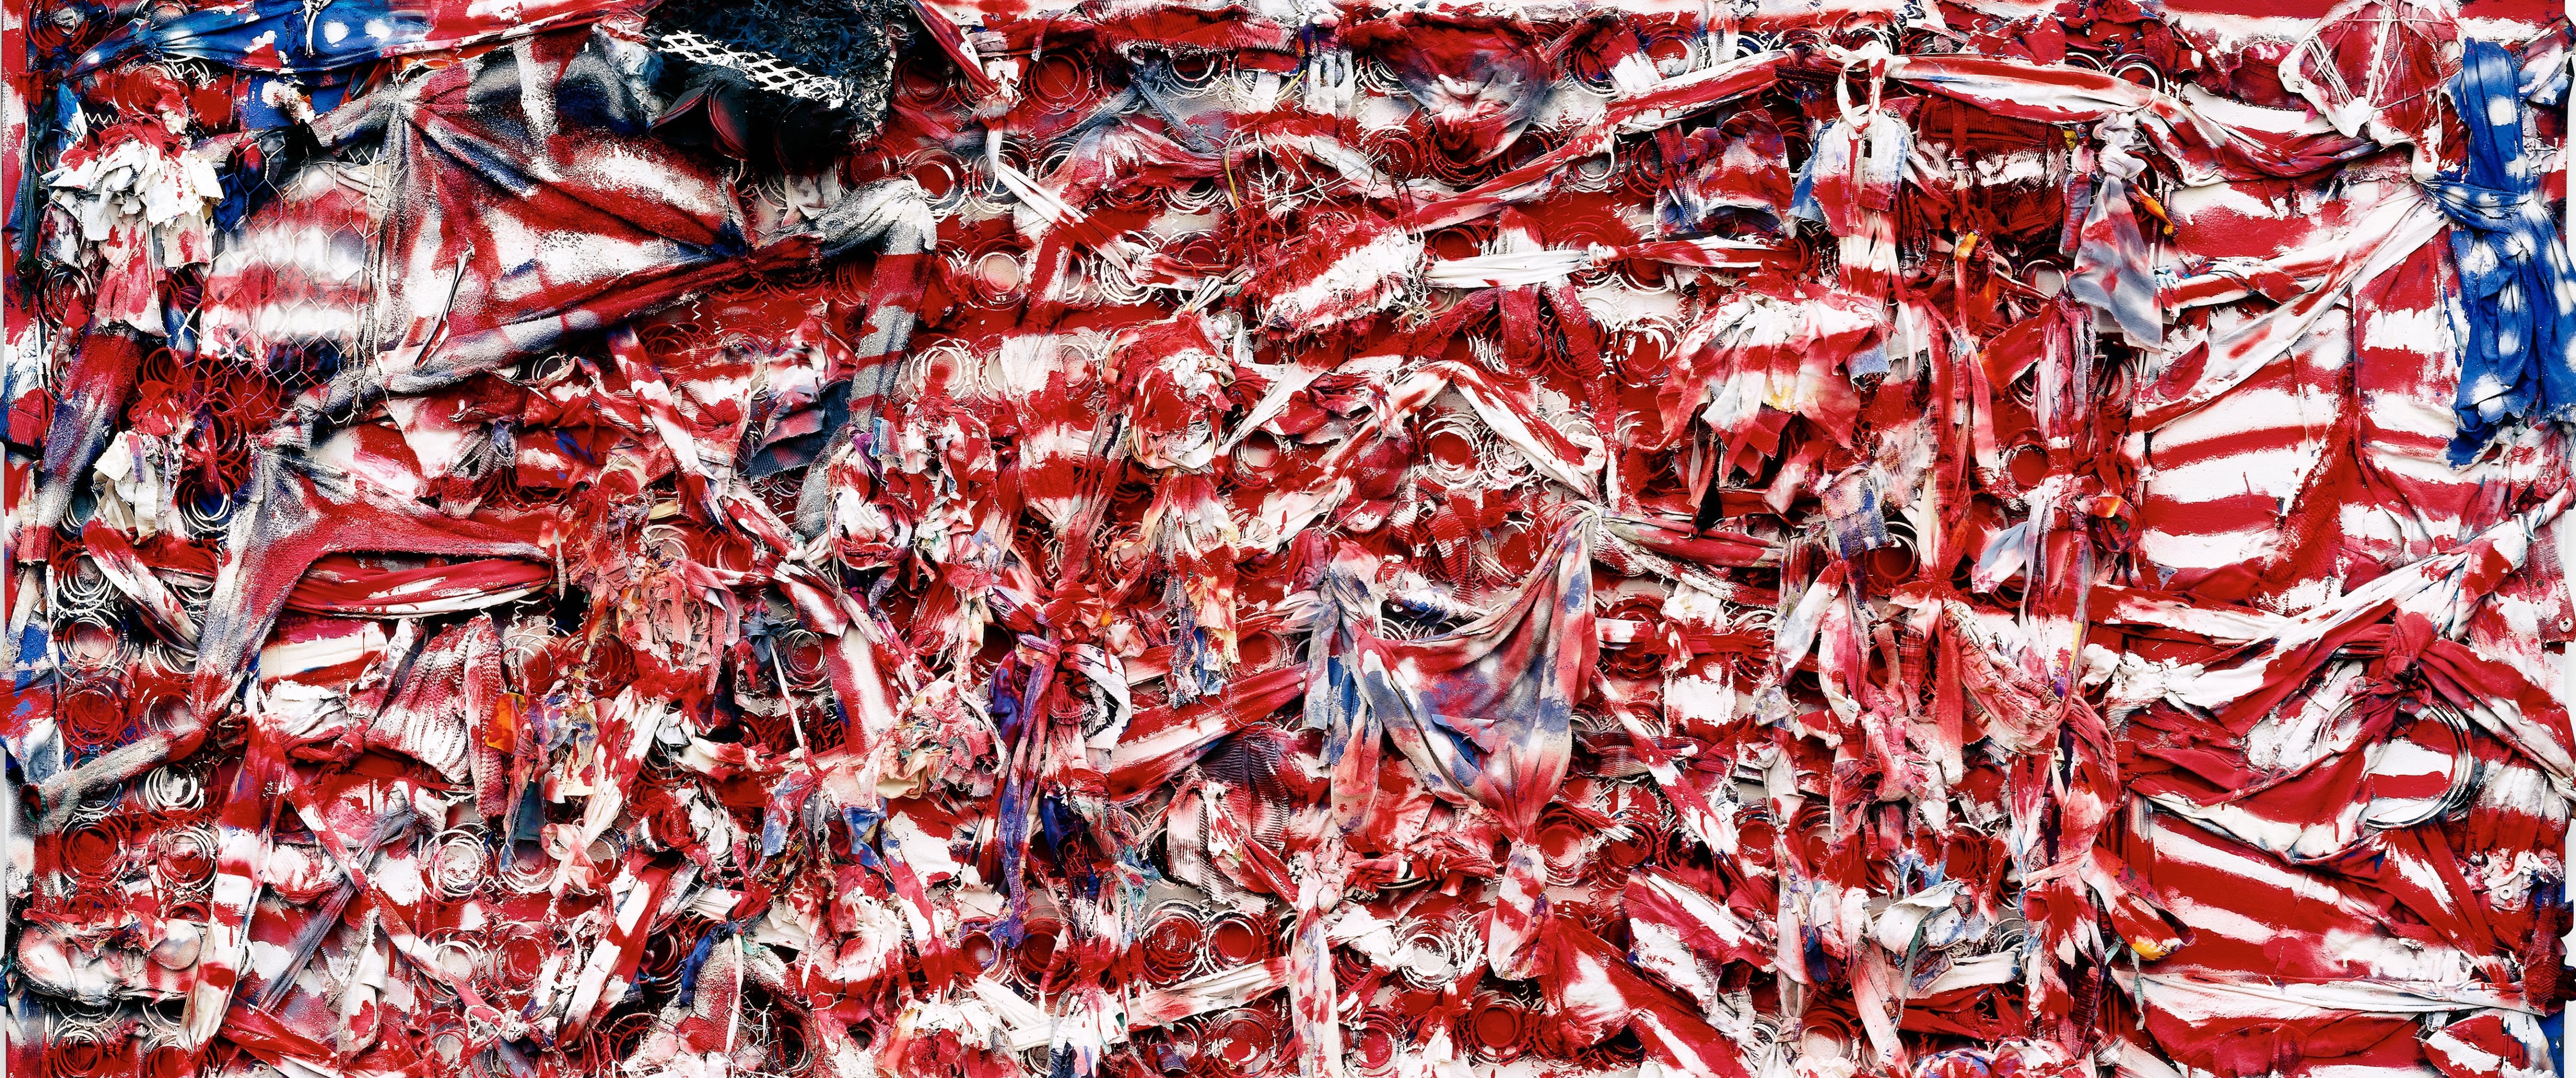 Photography Painting American Flag Collage 5160x2160